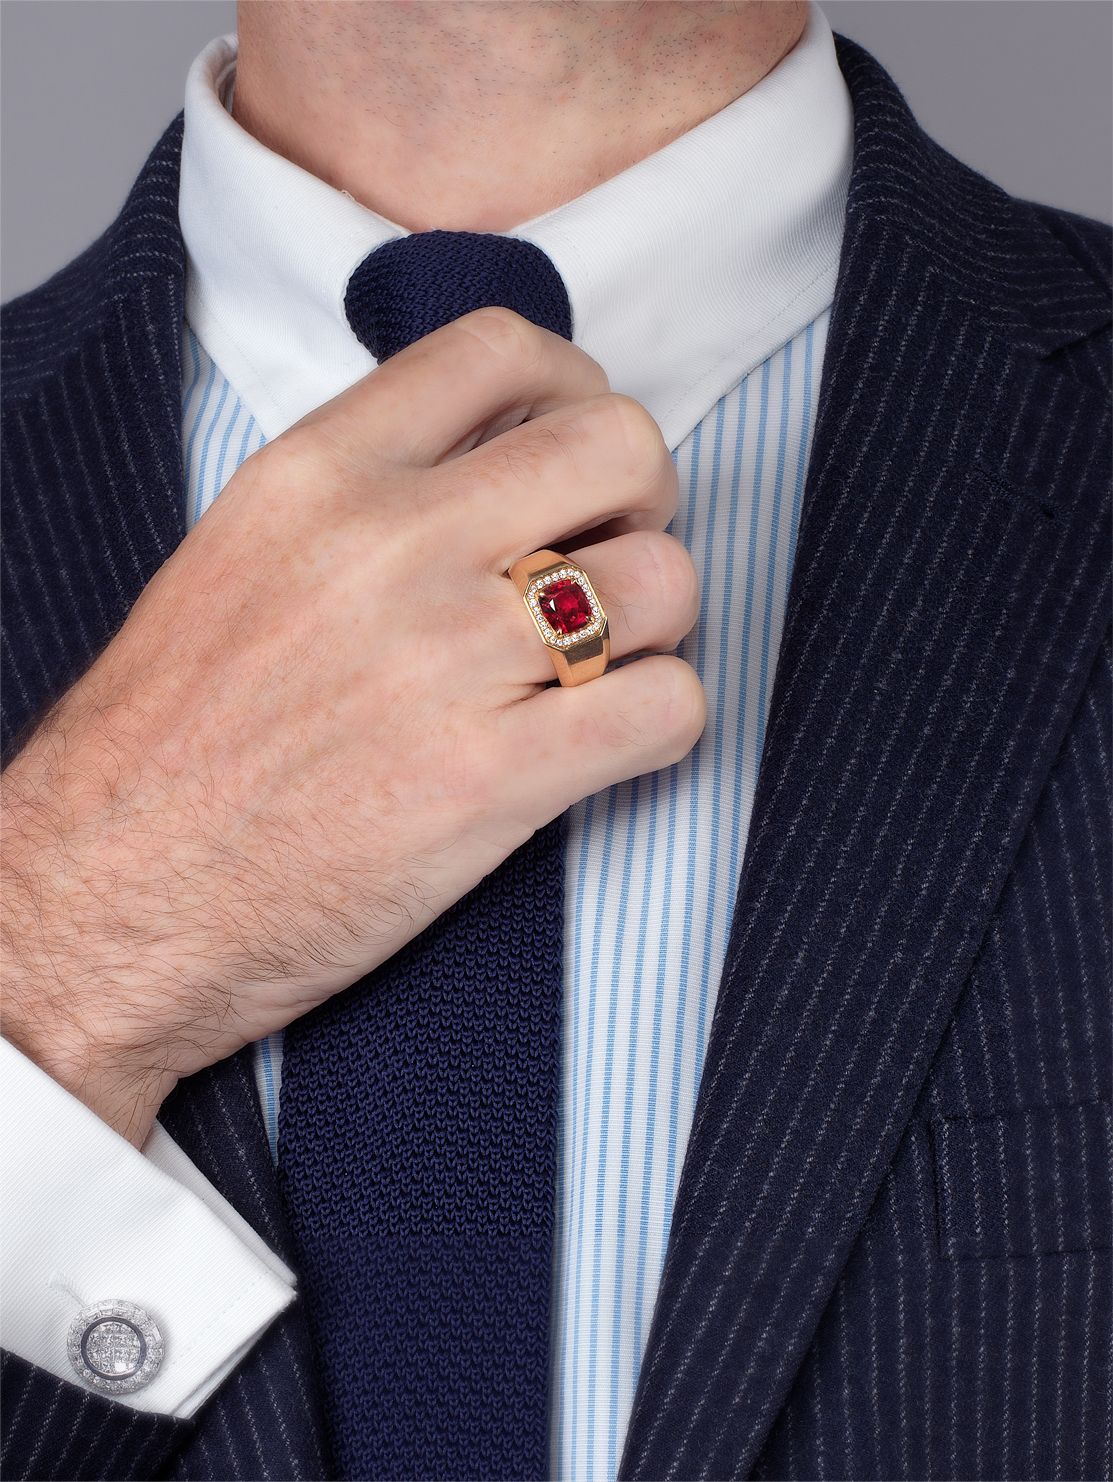 10 Trendy Rings For Men To Flaunt With Any Outfit